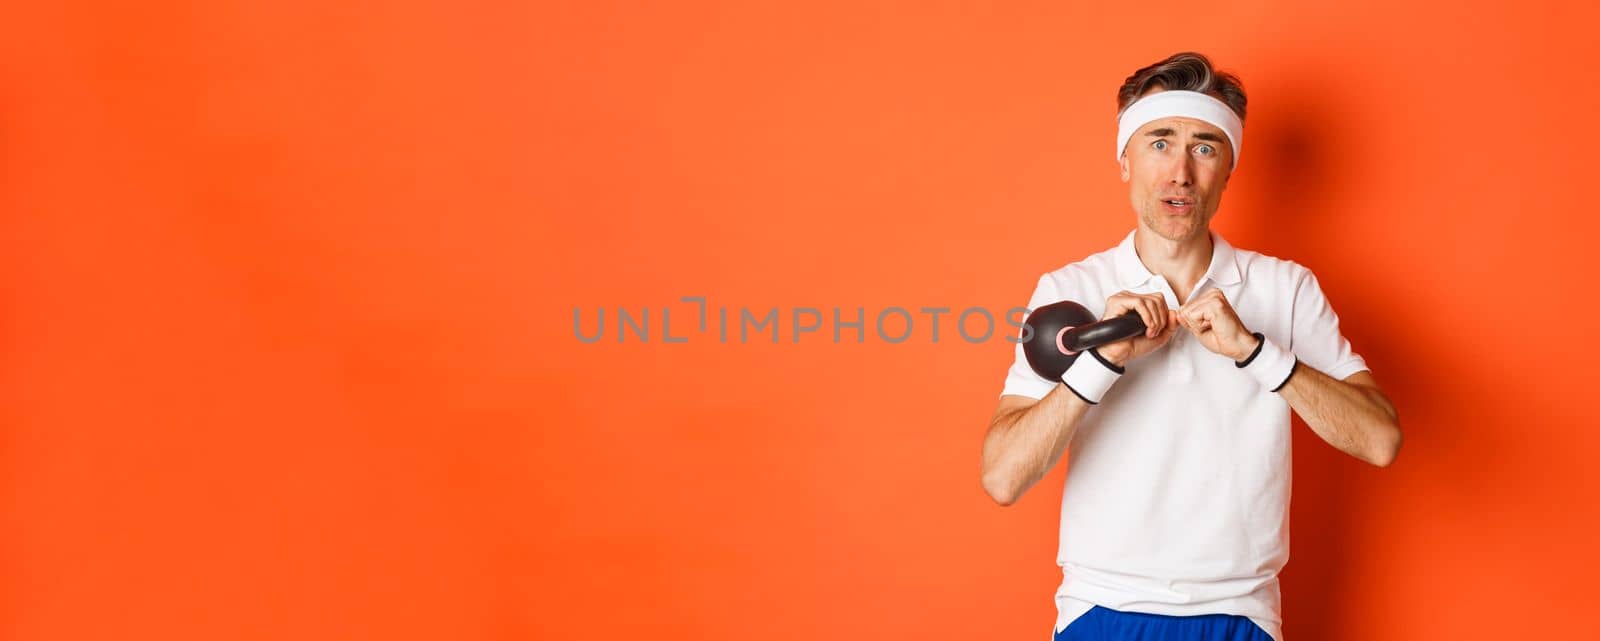 Concept of workout, gym and lifestyle. Close-up of weak and slim middle-aged fitness guy, doing sport exercises with kettlebell, standing over orange background.